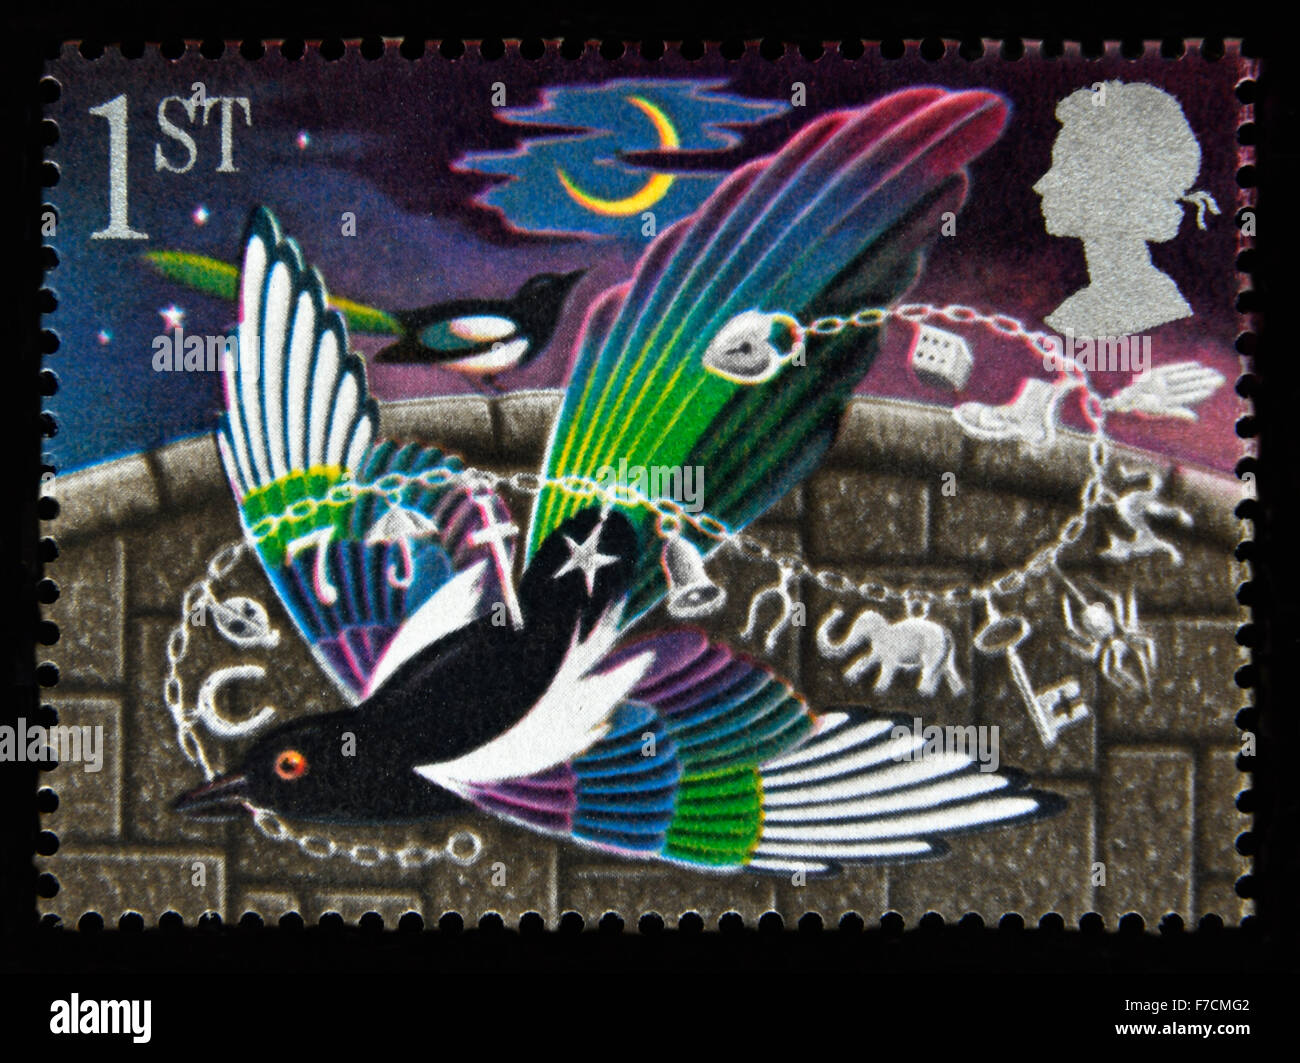 Postage stamp. Great Britain. Queen Elizabeth II. 1991. Greetings Stamps, "Good Luck". Magpies and Charm Bracelet. Stock Photo